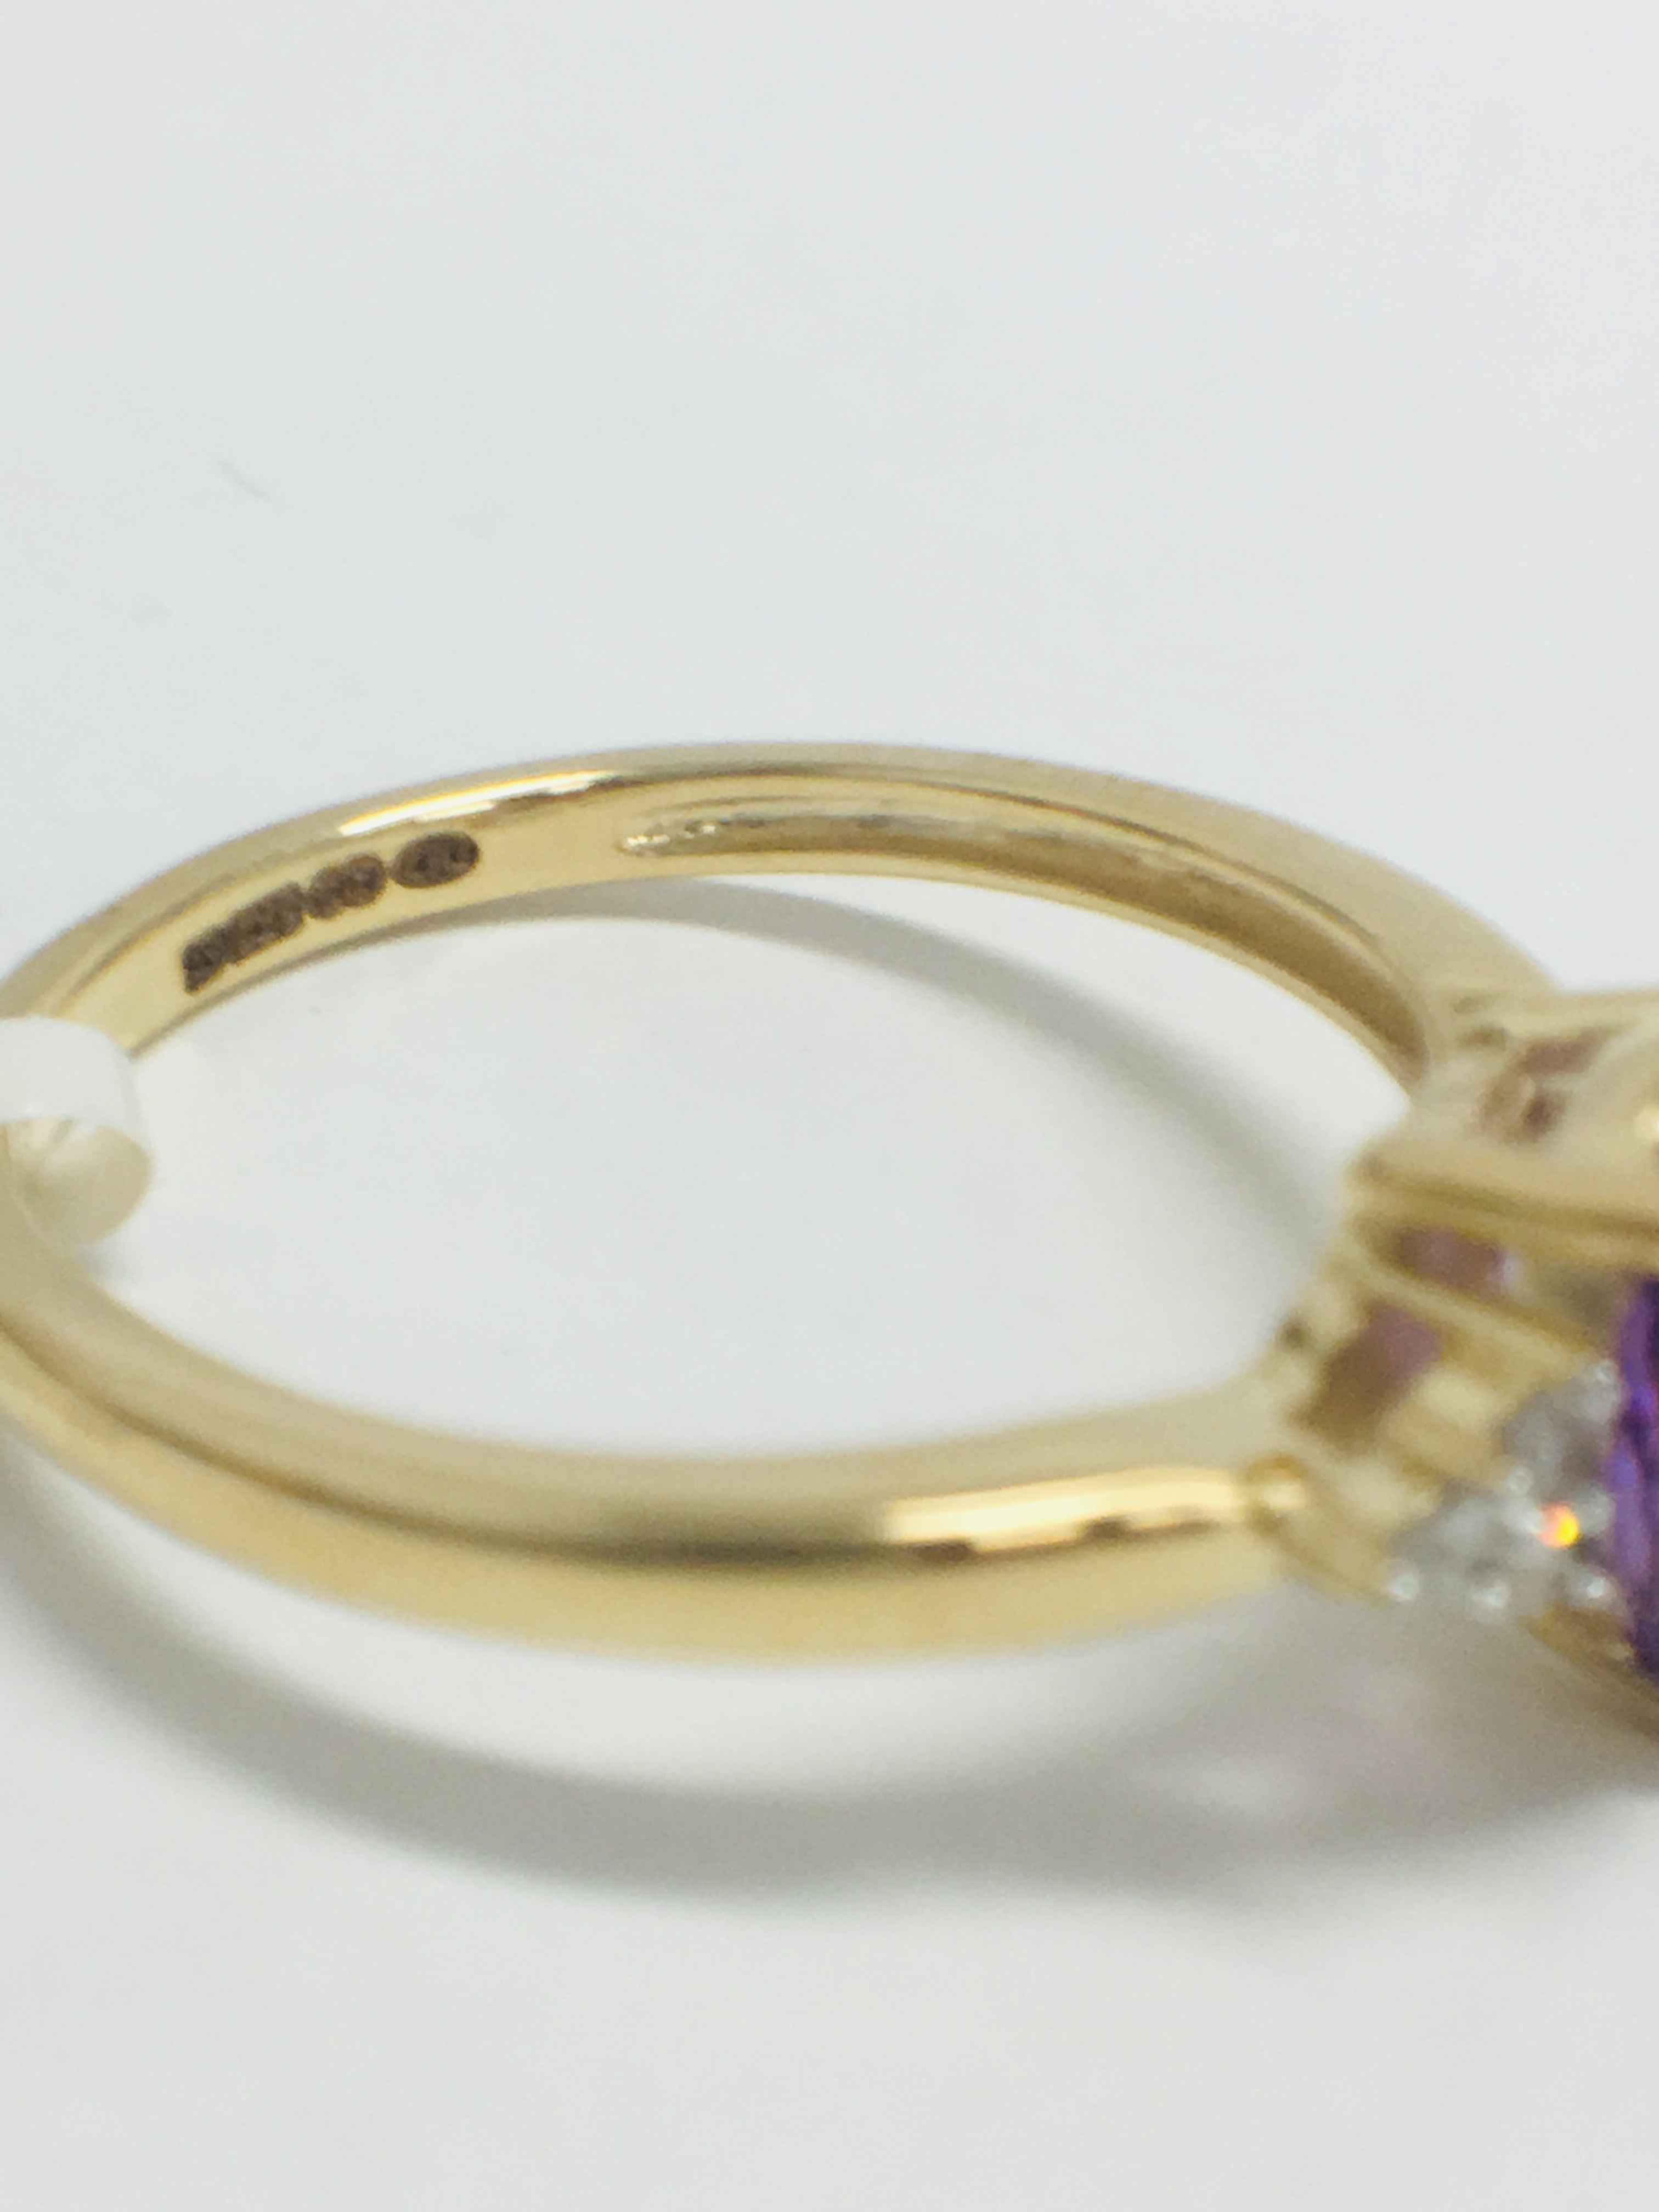 9Ct Yellow Gold Amethyst Diamond Navette Style Dress Ring, - Image 8 of 10